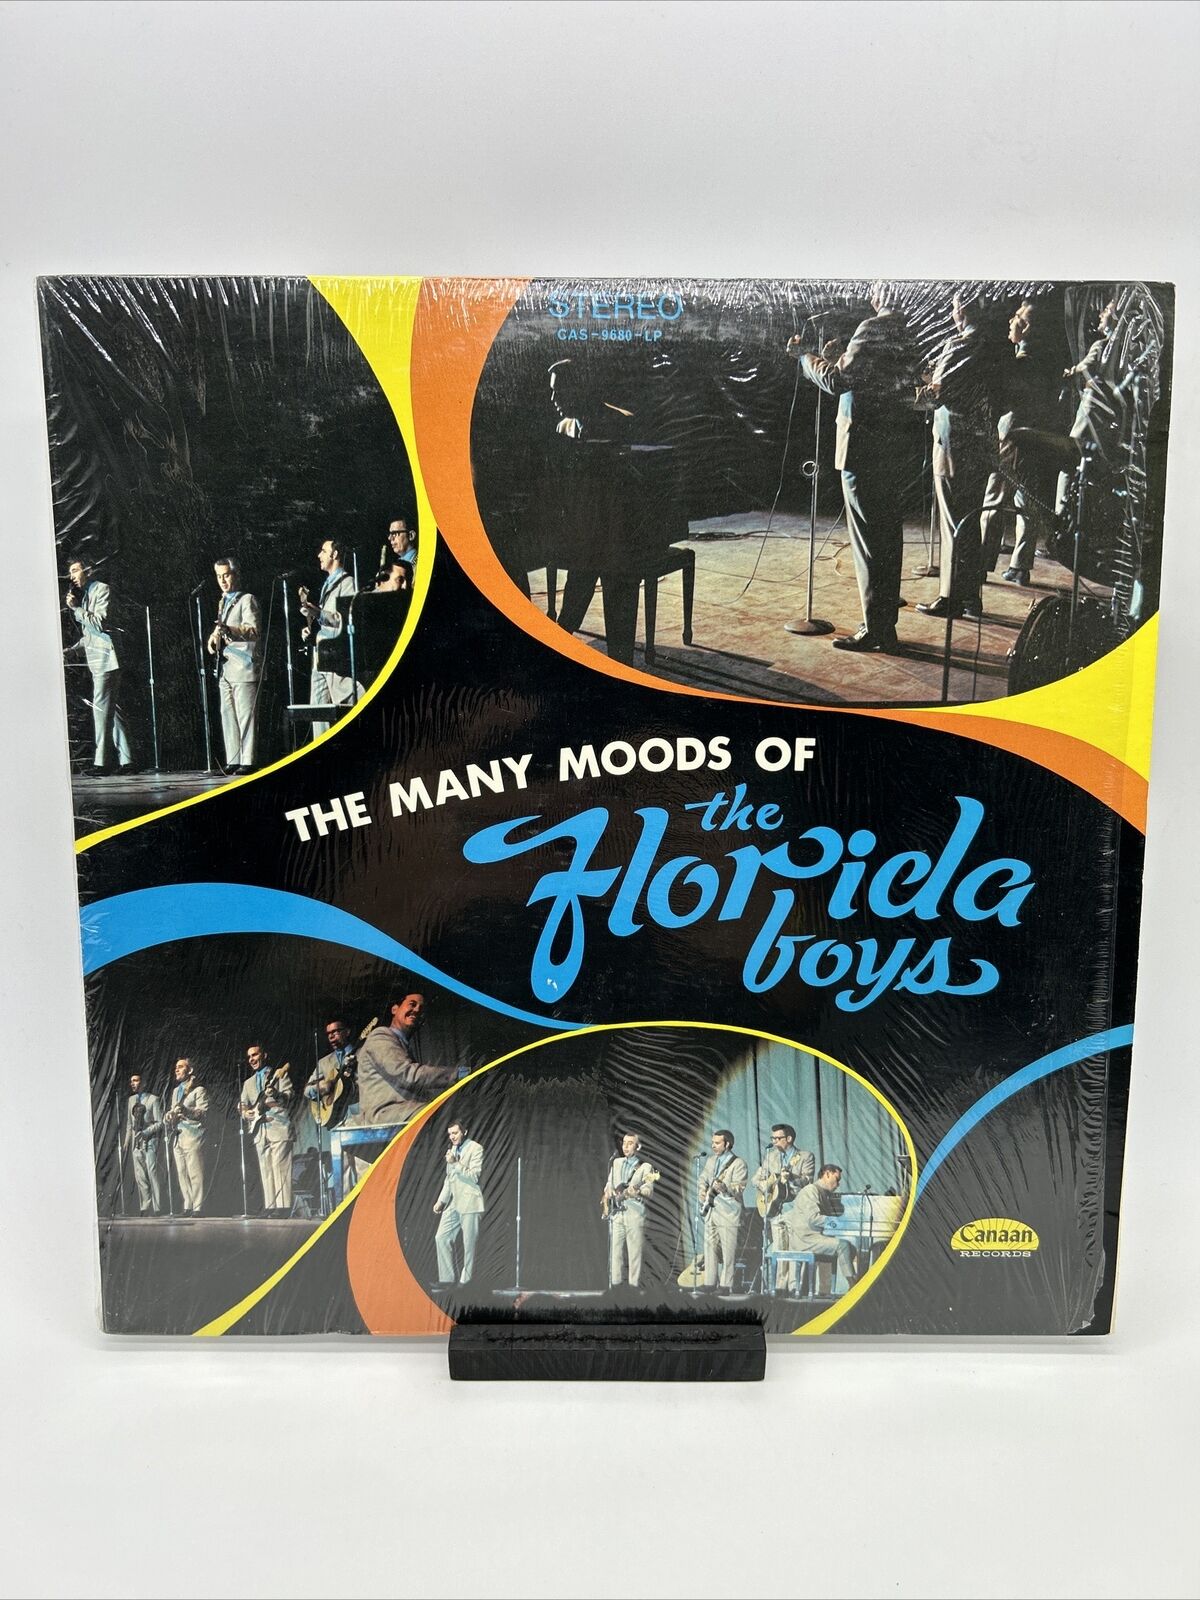 The Florida Boys The Many Moods Of Vinyl LP Canaan Records CAS-9680 EX